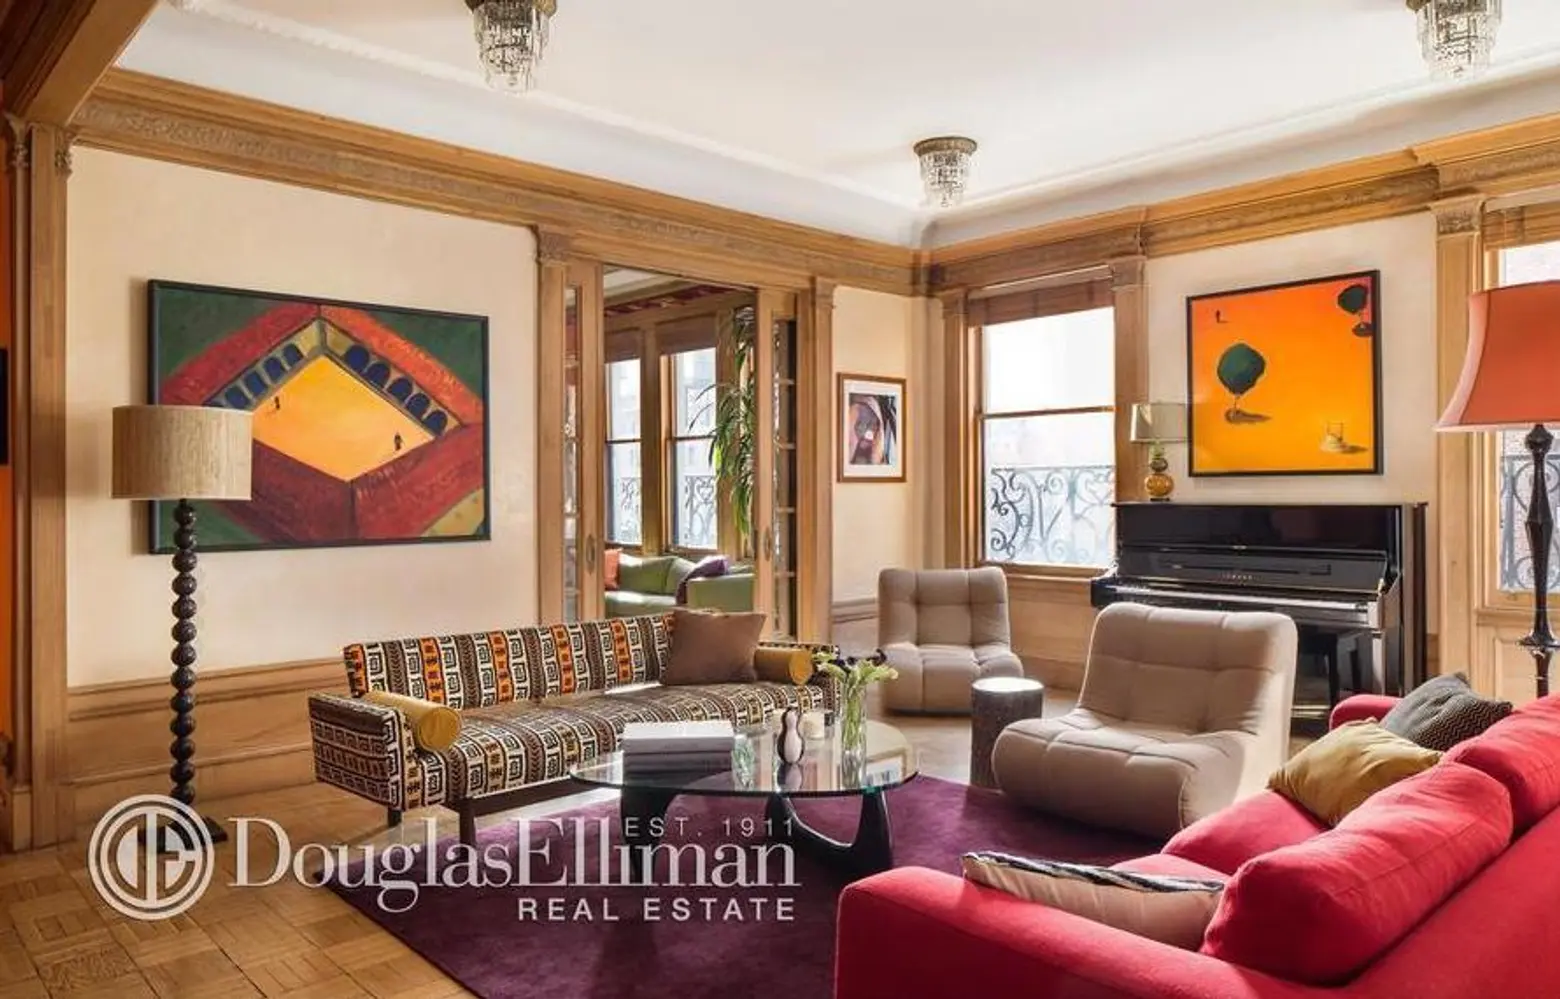 Holly Hunter Sells Her Greenwich Village Apartment for $7.6 Million